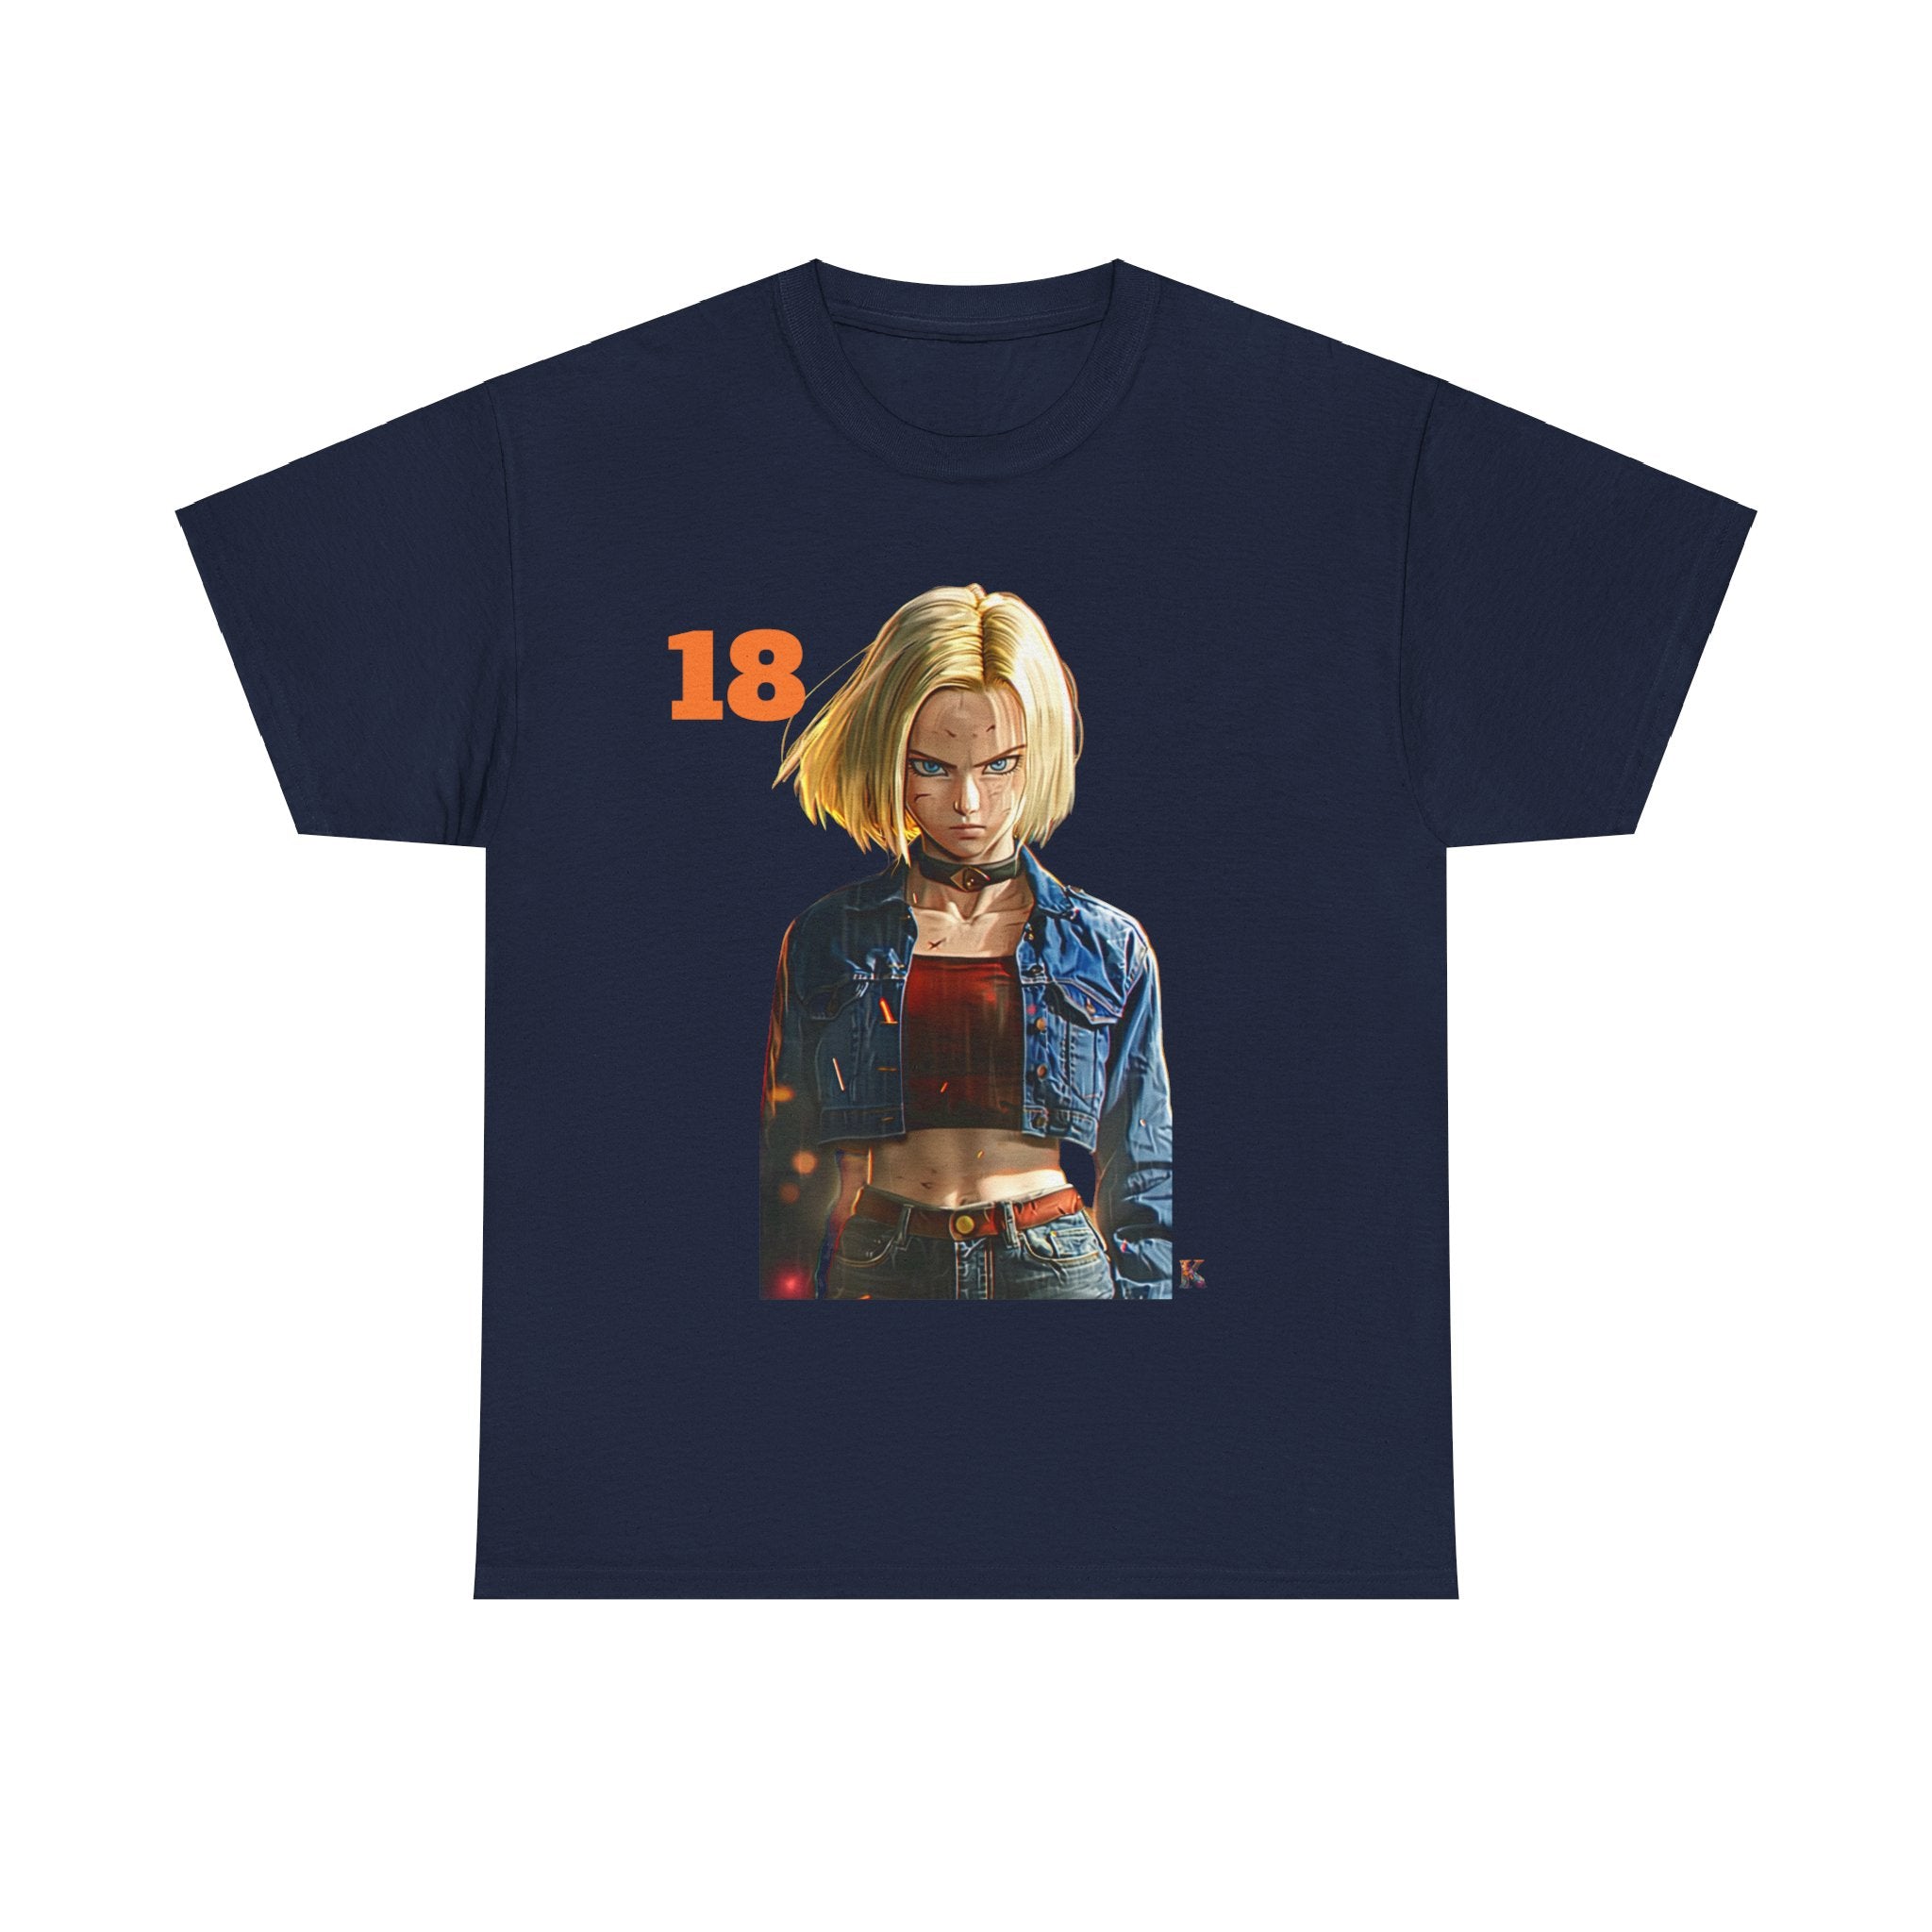 The image displays a stylish unisex heavy cotton tee, featuring a vibrant print inspired by Android 18. The tee is shown in a classic cut with a robust texture, highlighting its quality and the eye-catching design of the character. The neutral background emphasizes the tee's adaptability and fashion-forward aesthetic.